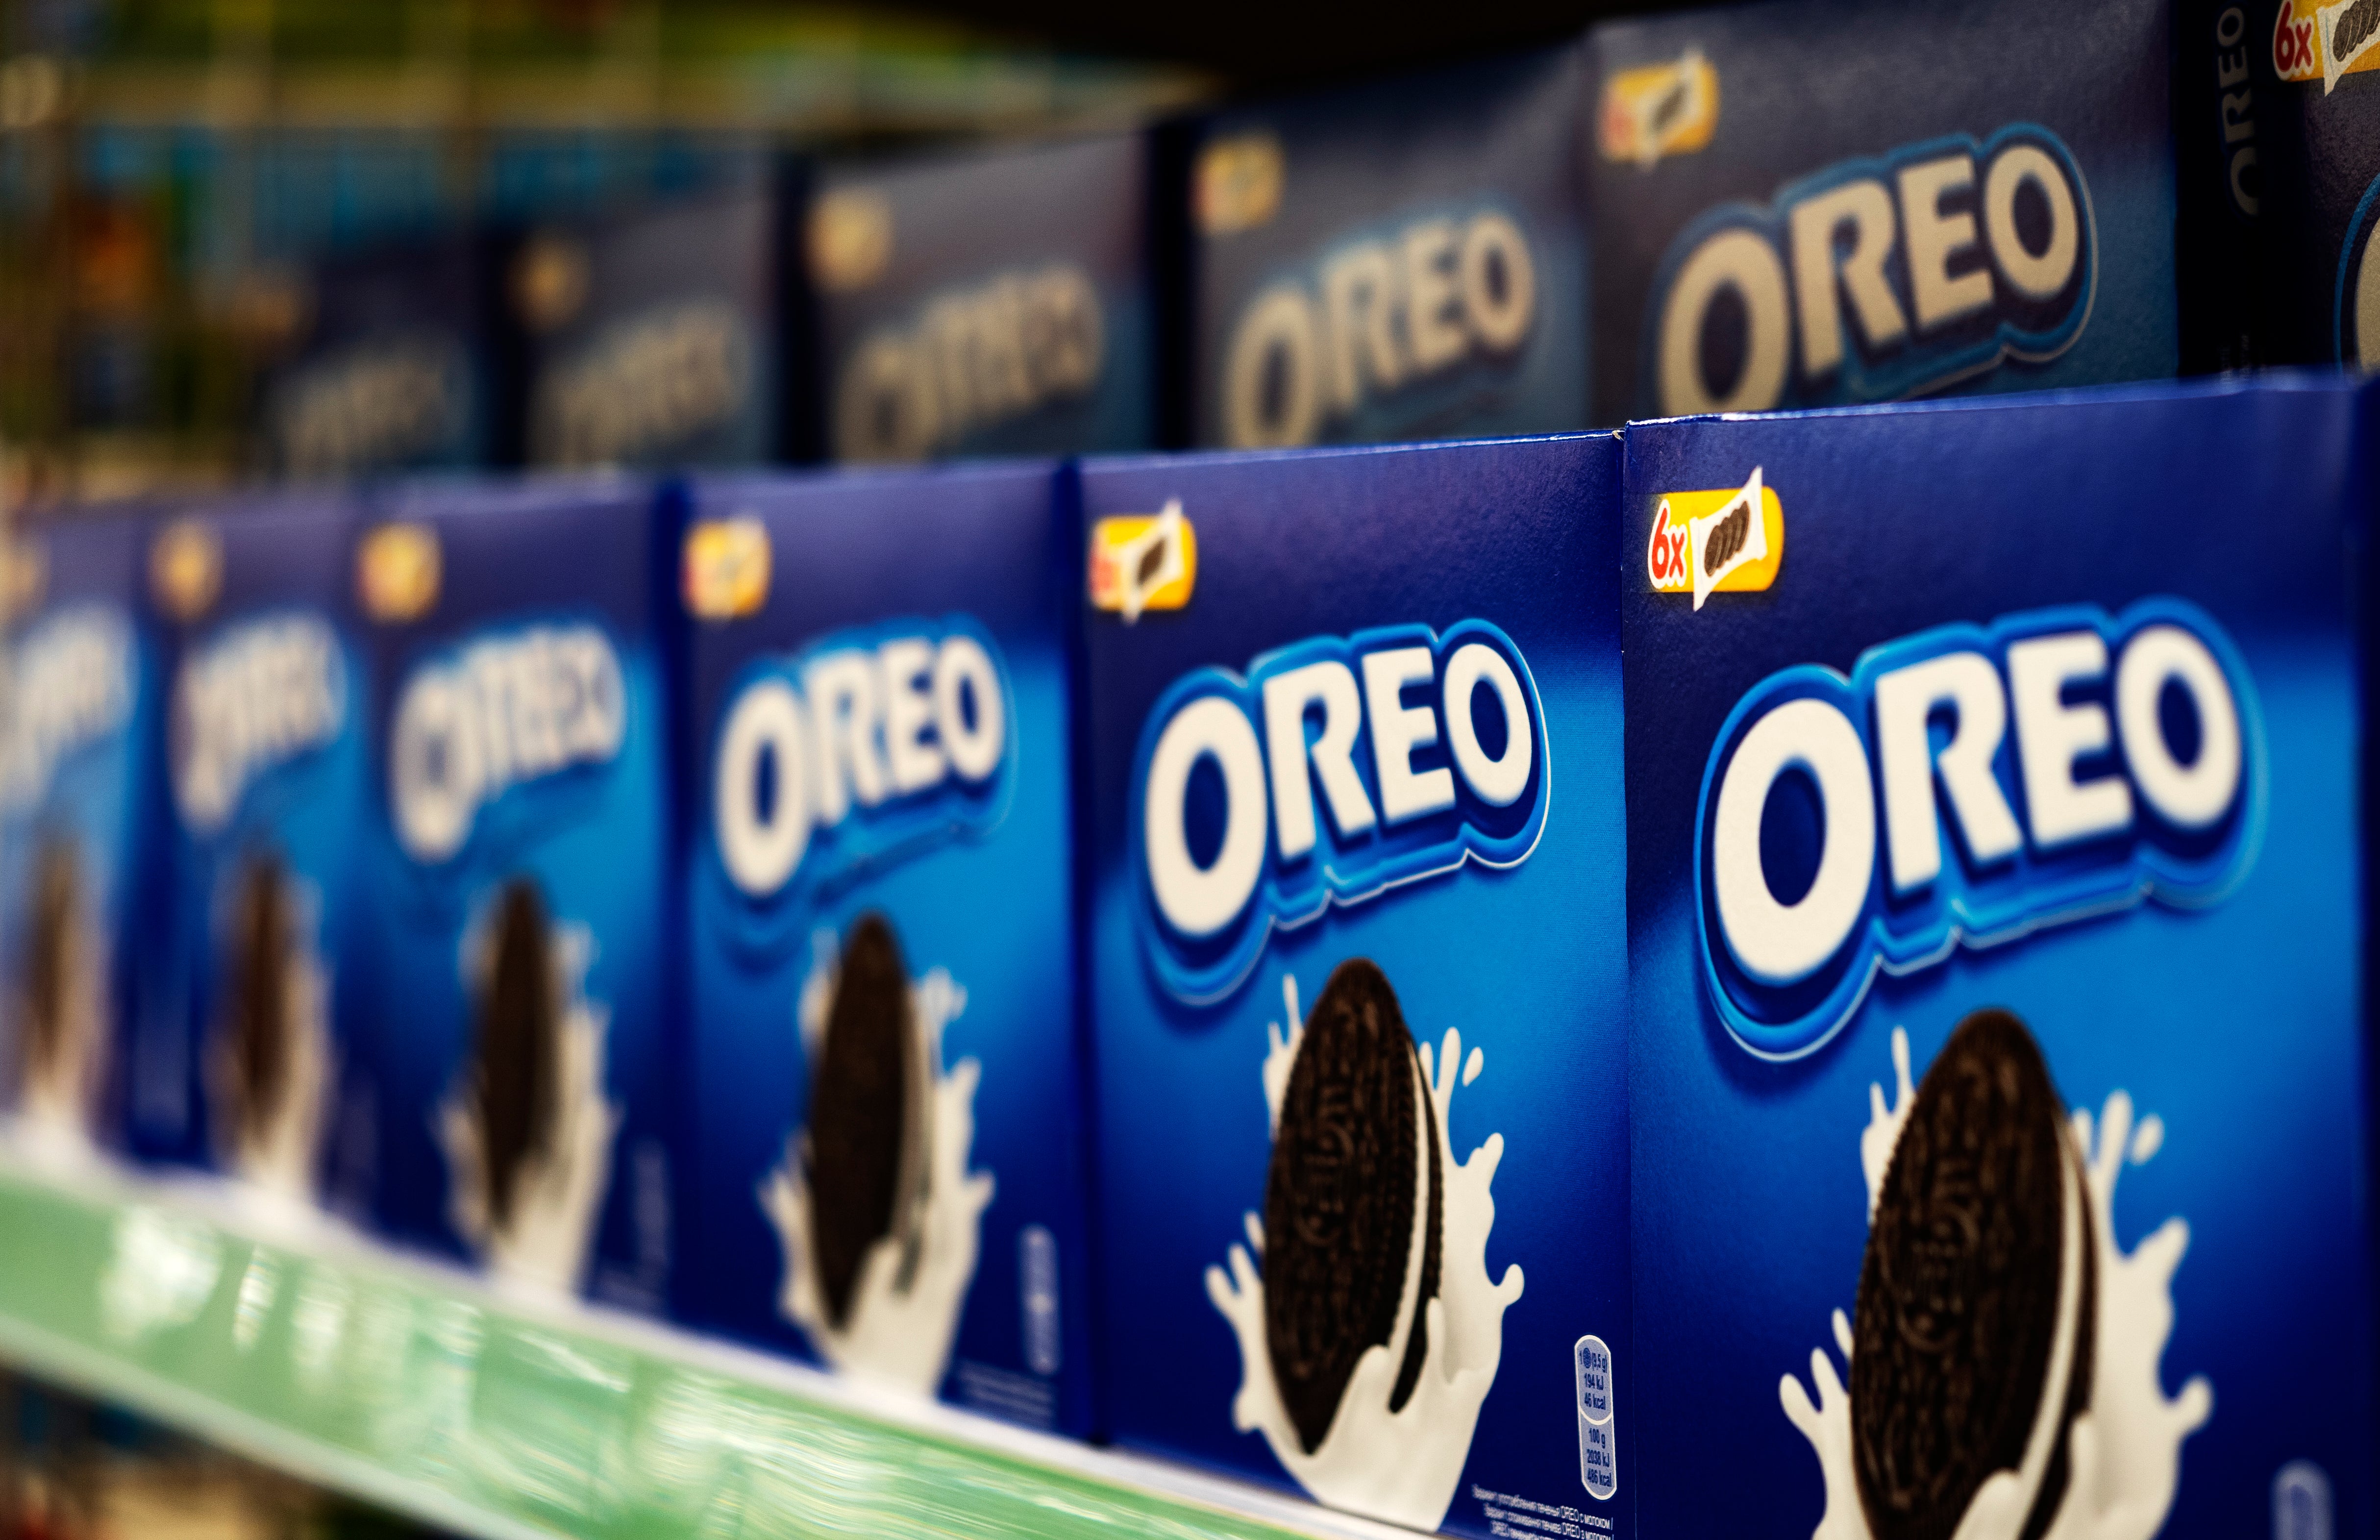 Image for Oreos and Chips Ahoy are getting too expensive for shoppers